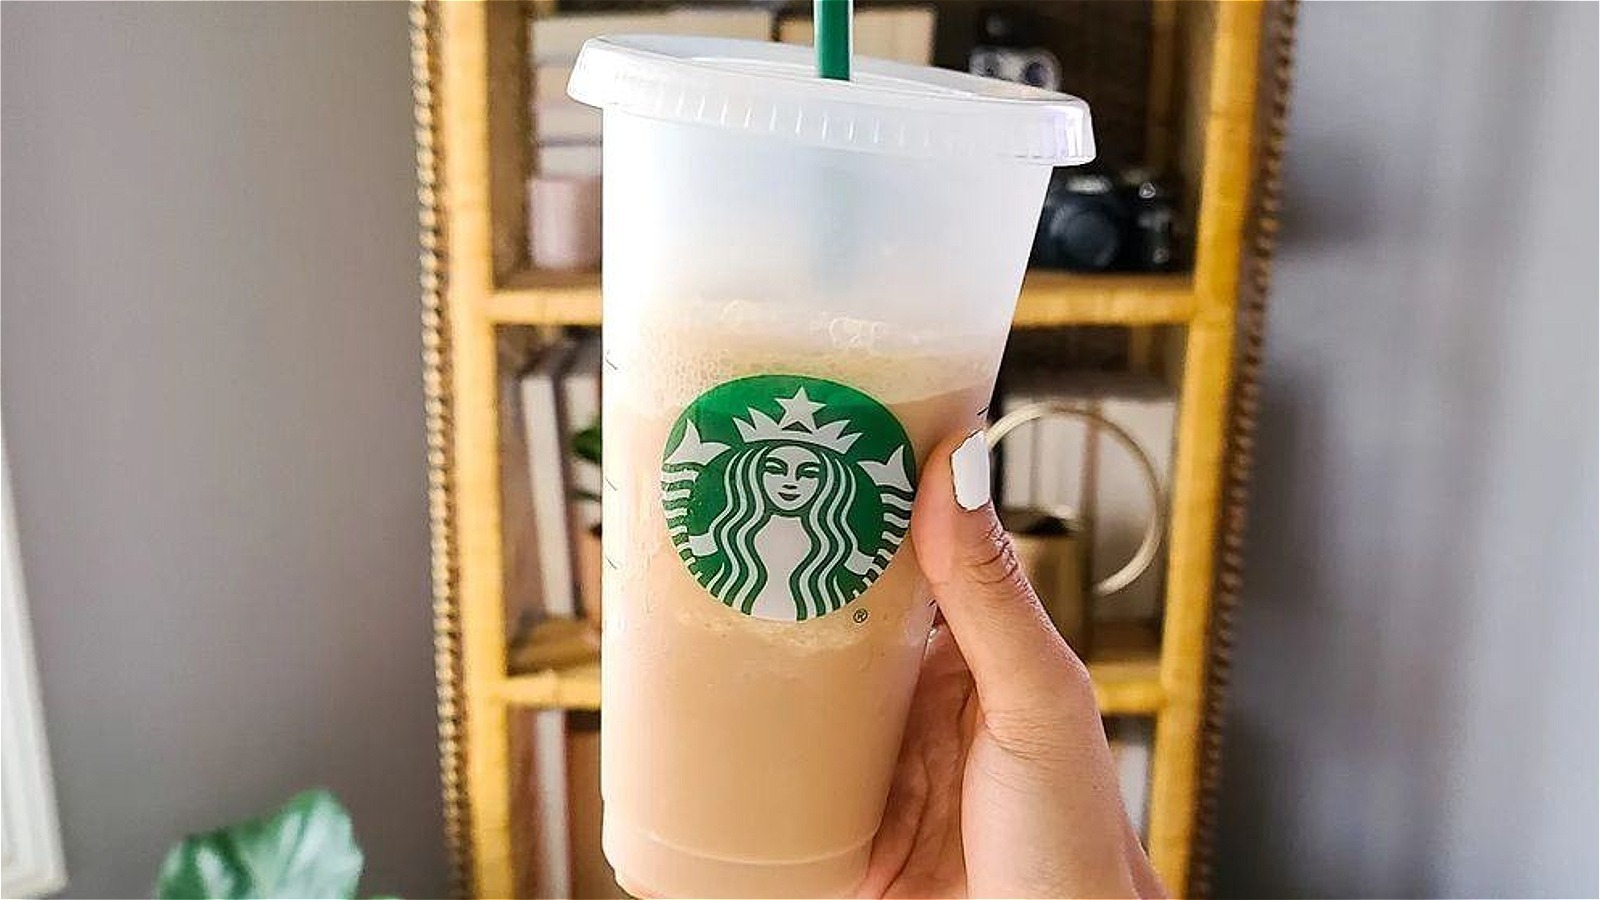 https://www.mashed.com/img/gallery/starbucks-is-trying-to-standardize-bring-your-own-cups-to-drive-thrus/l-intro-1682958488.jpg